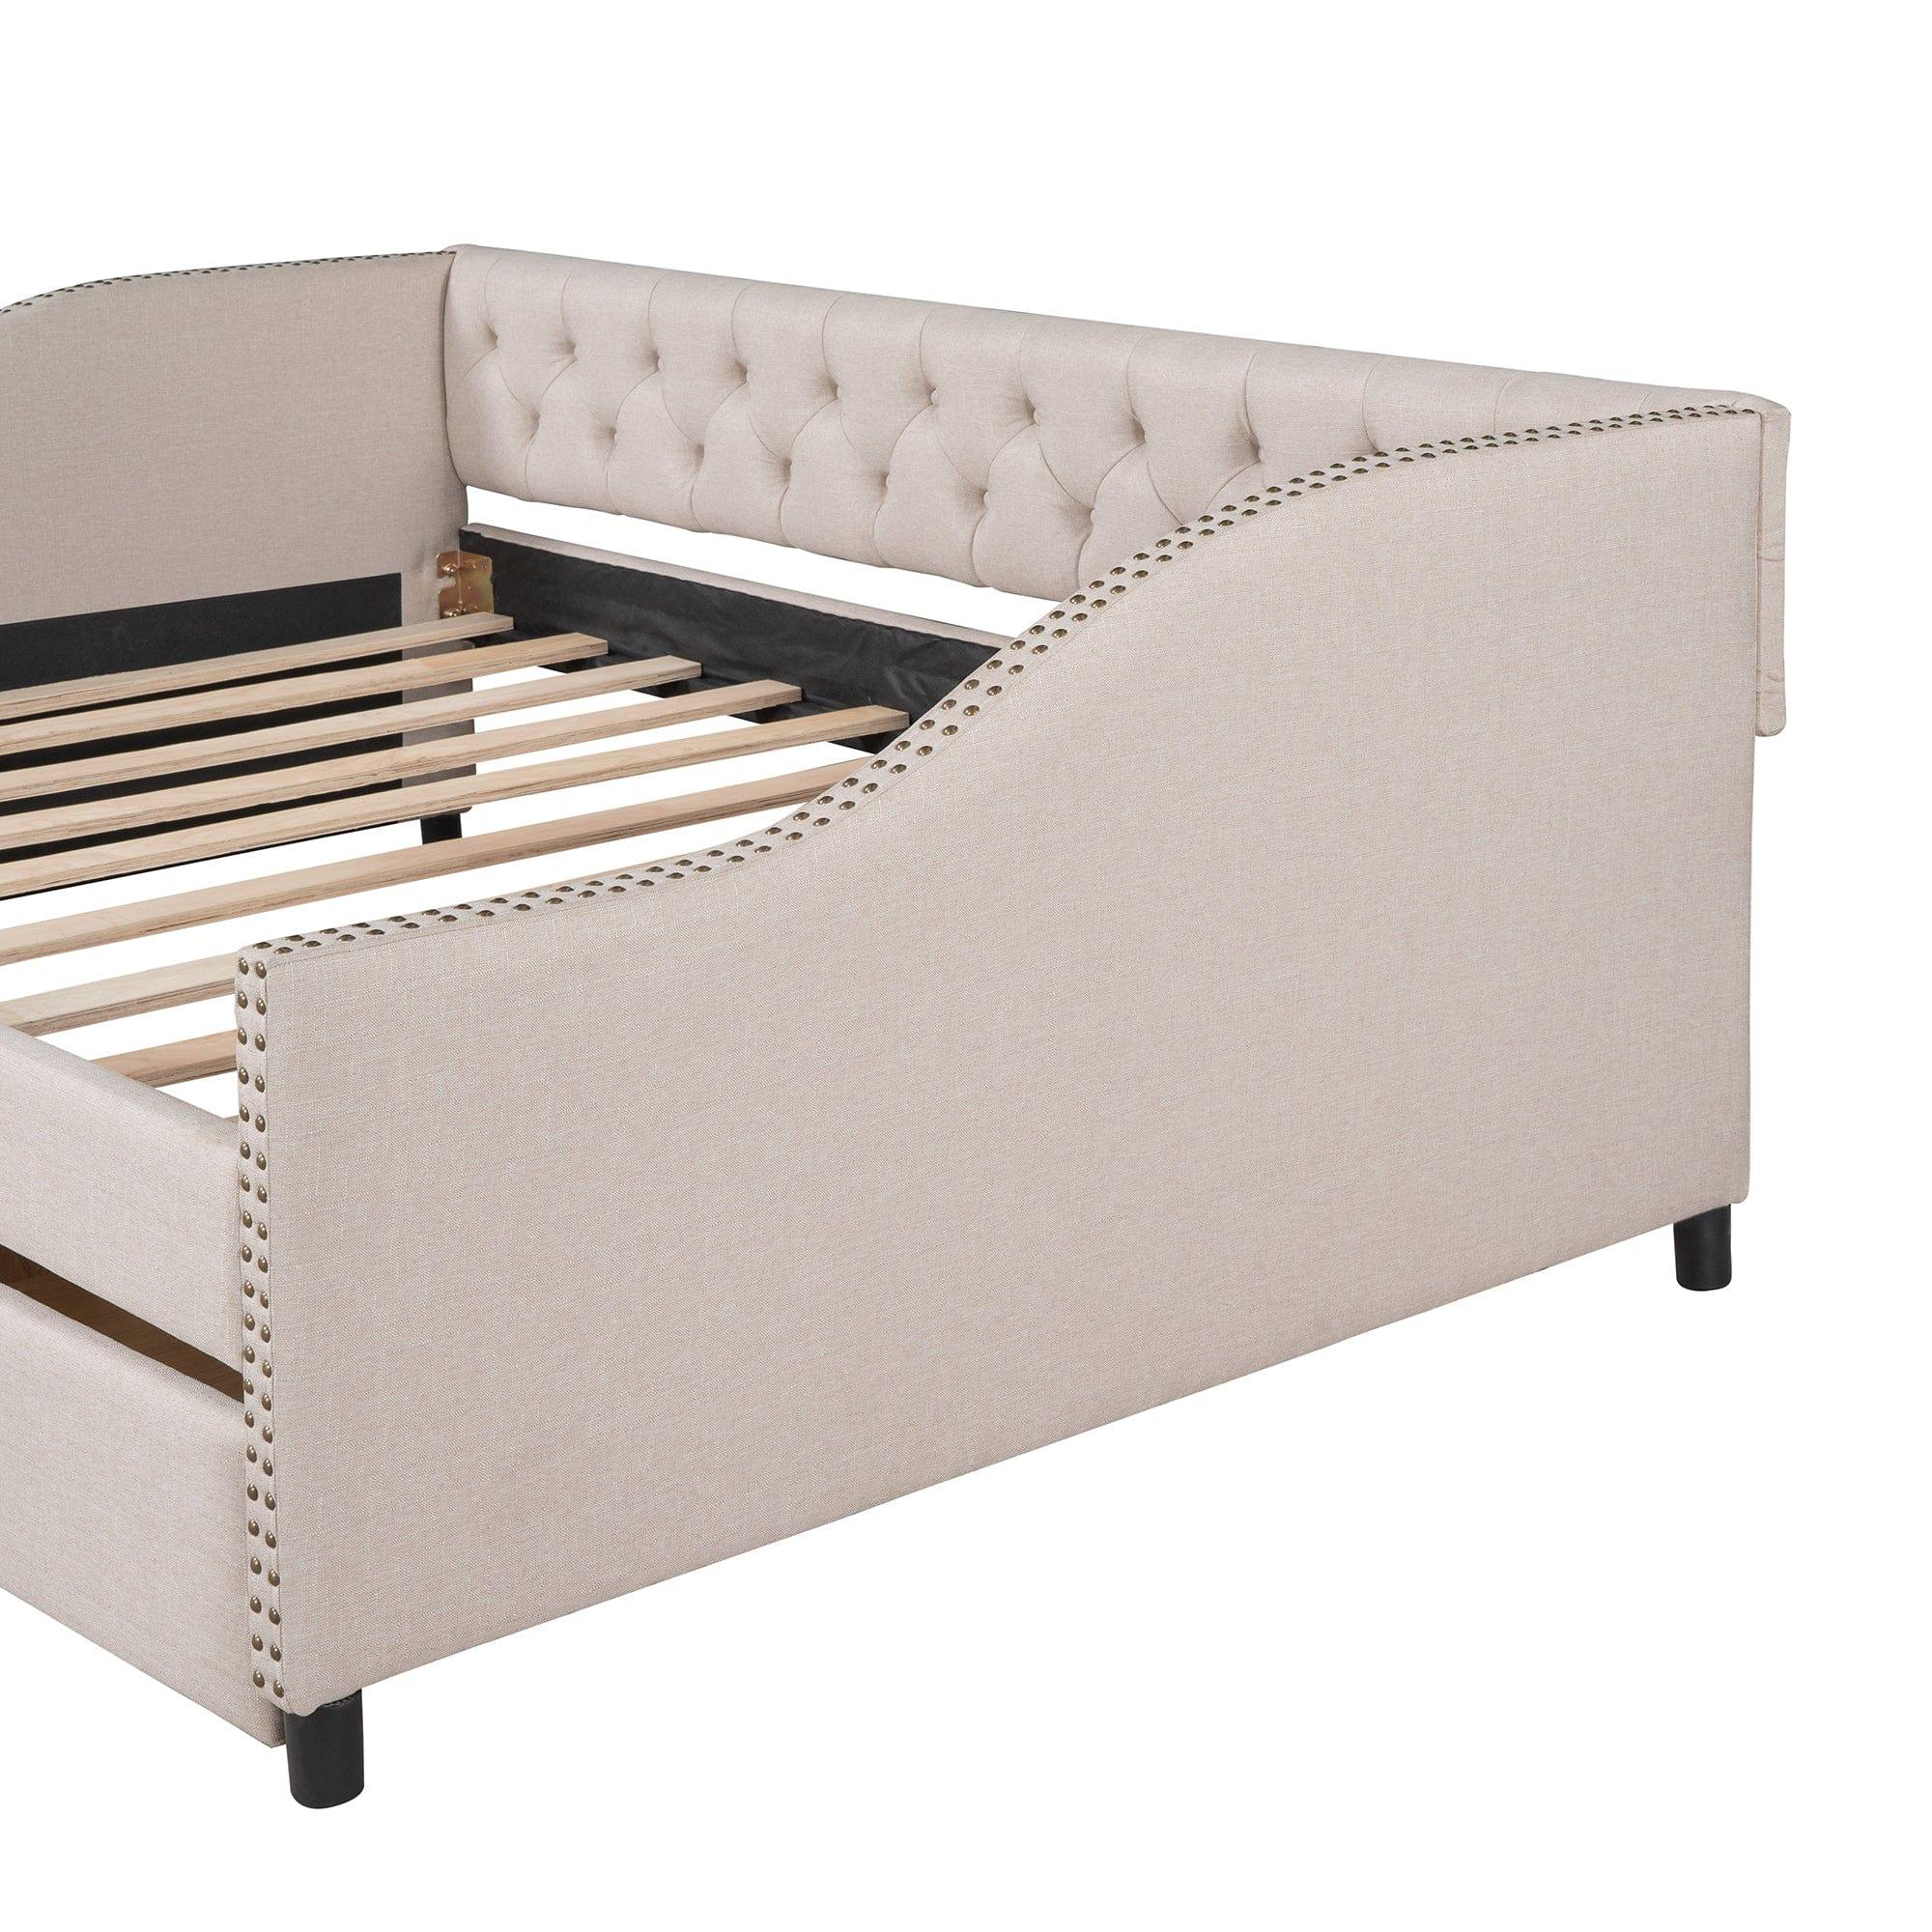 Shop Upholstered daybed with Two Drawers, Wood Slat Support, Beige, Full Size(OLD SKU :LP001111AAA) Mademoiselle Home Decor